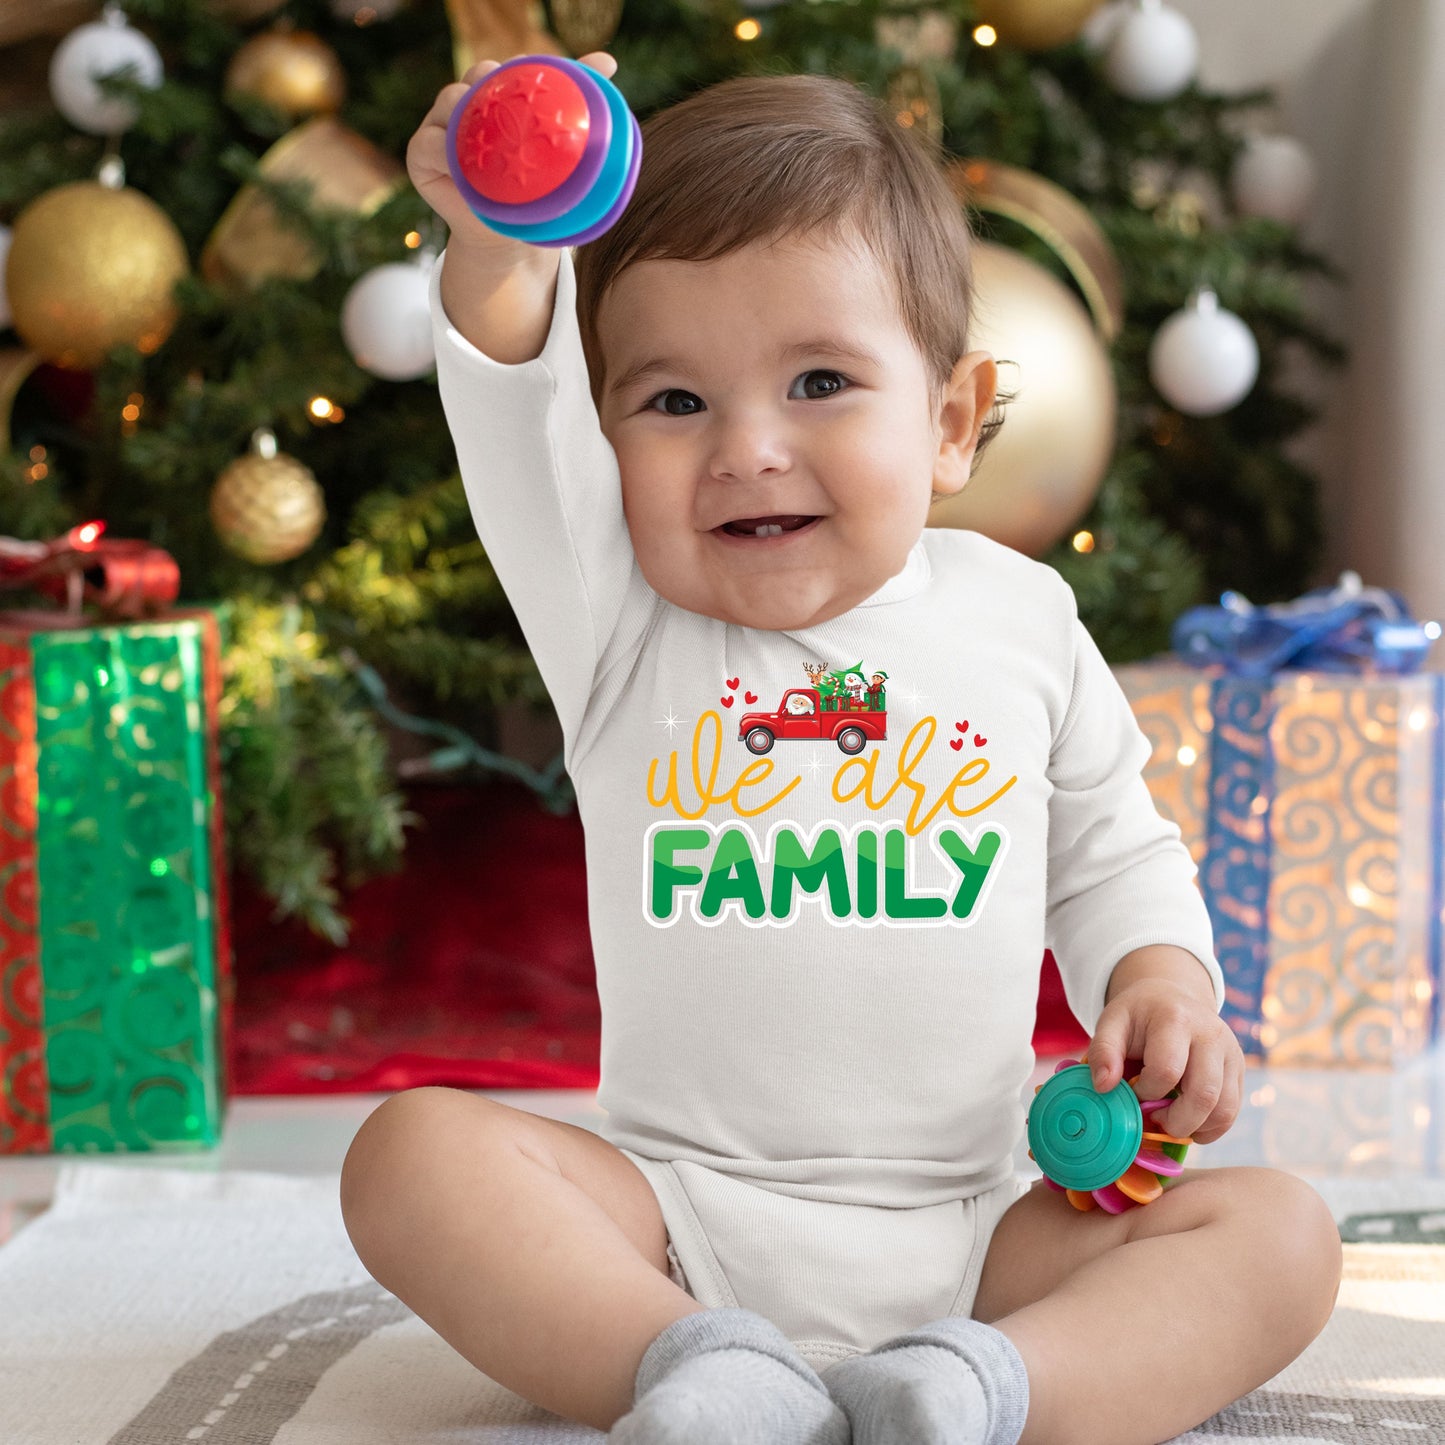 We Are Family, Christmas Bodysuits For Kids, Christmas Bodysuits, Christmas Onesies, Christmas Long Sleeves, Christmas Present